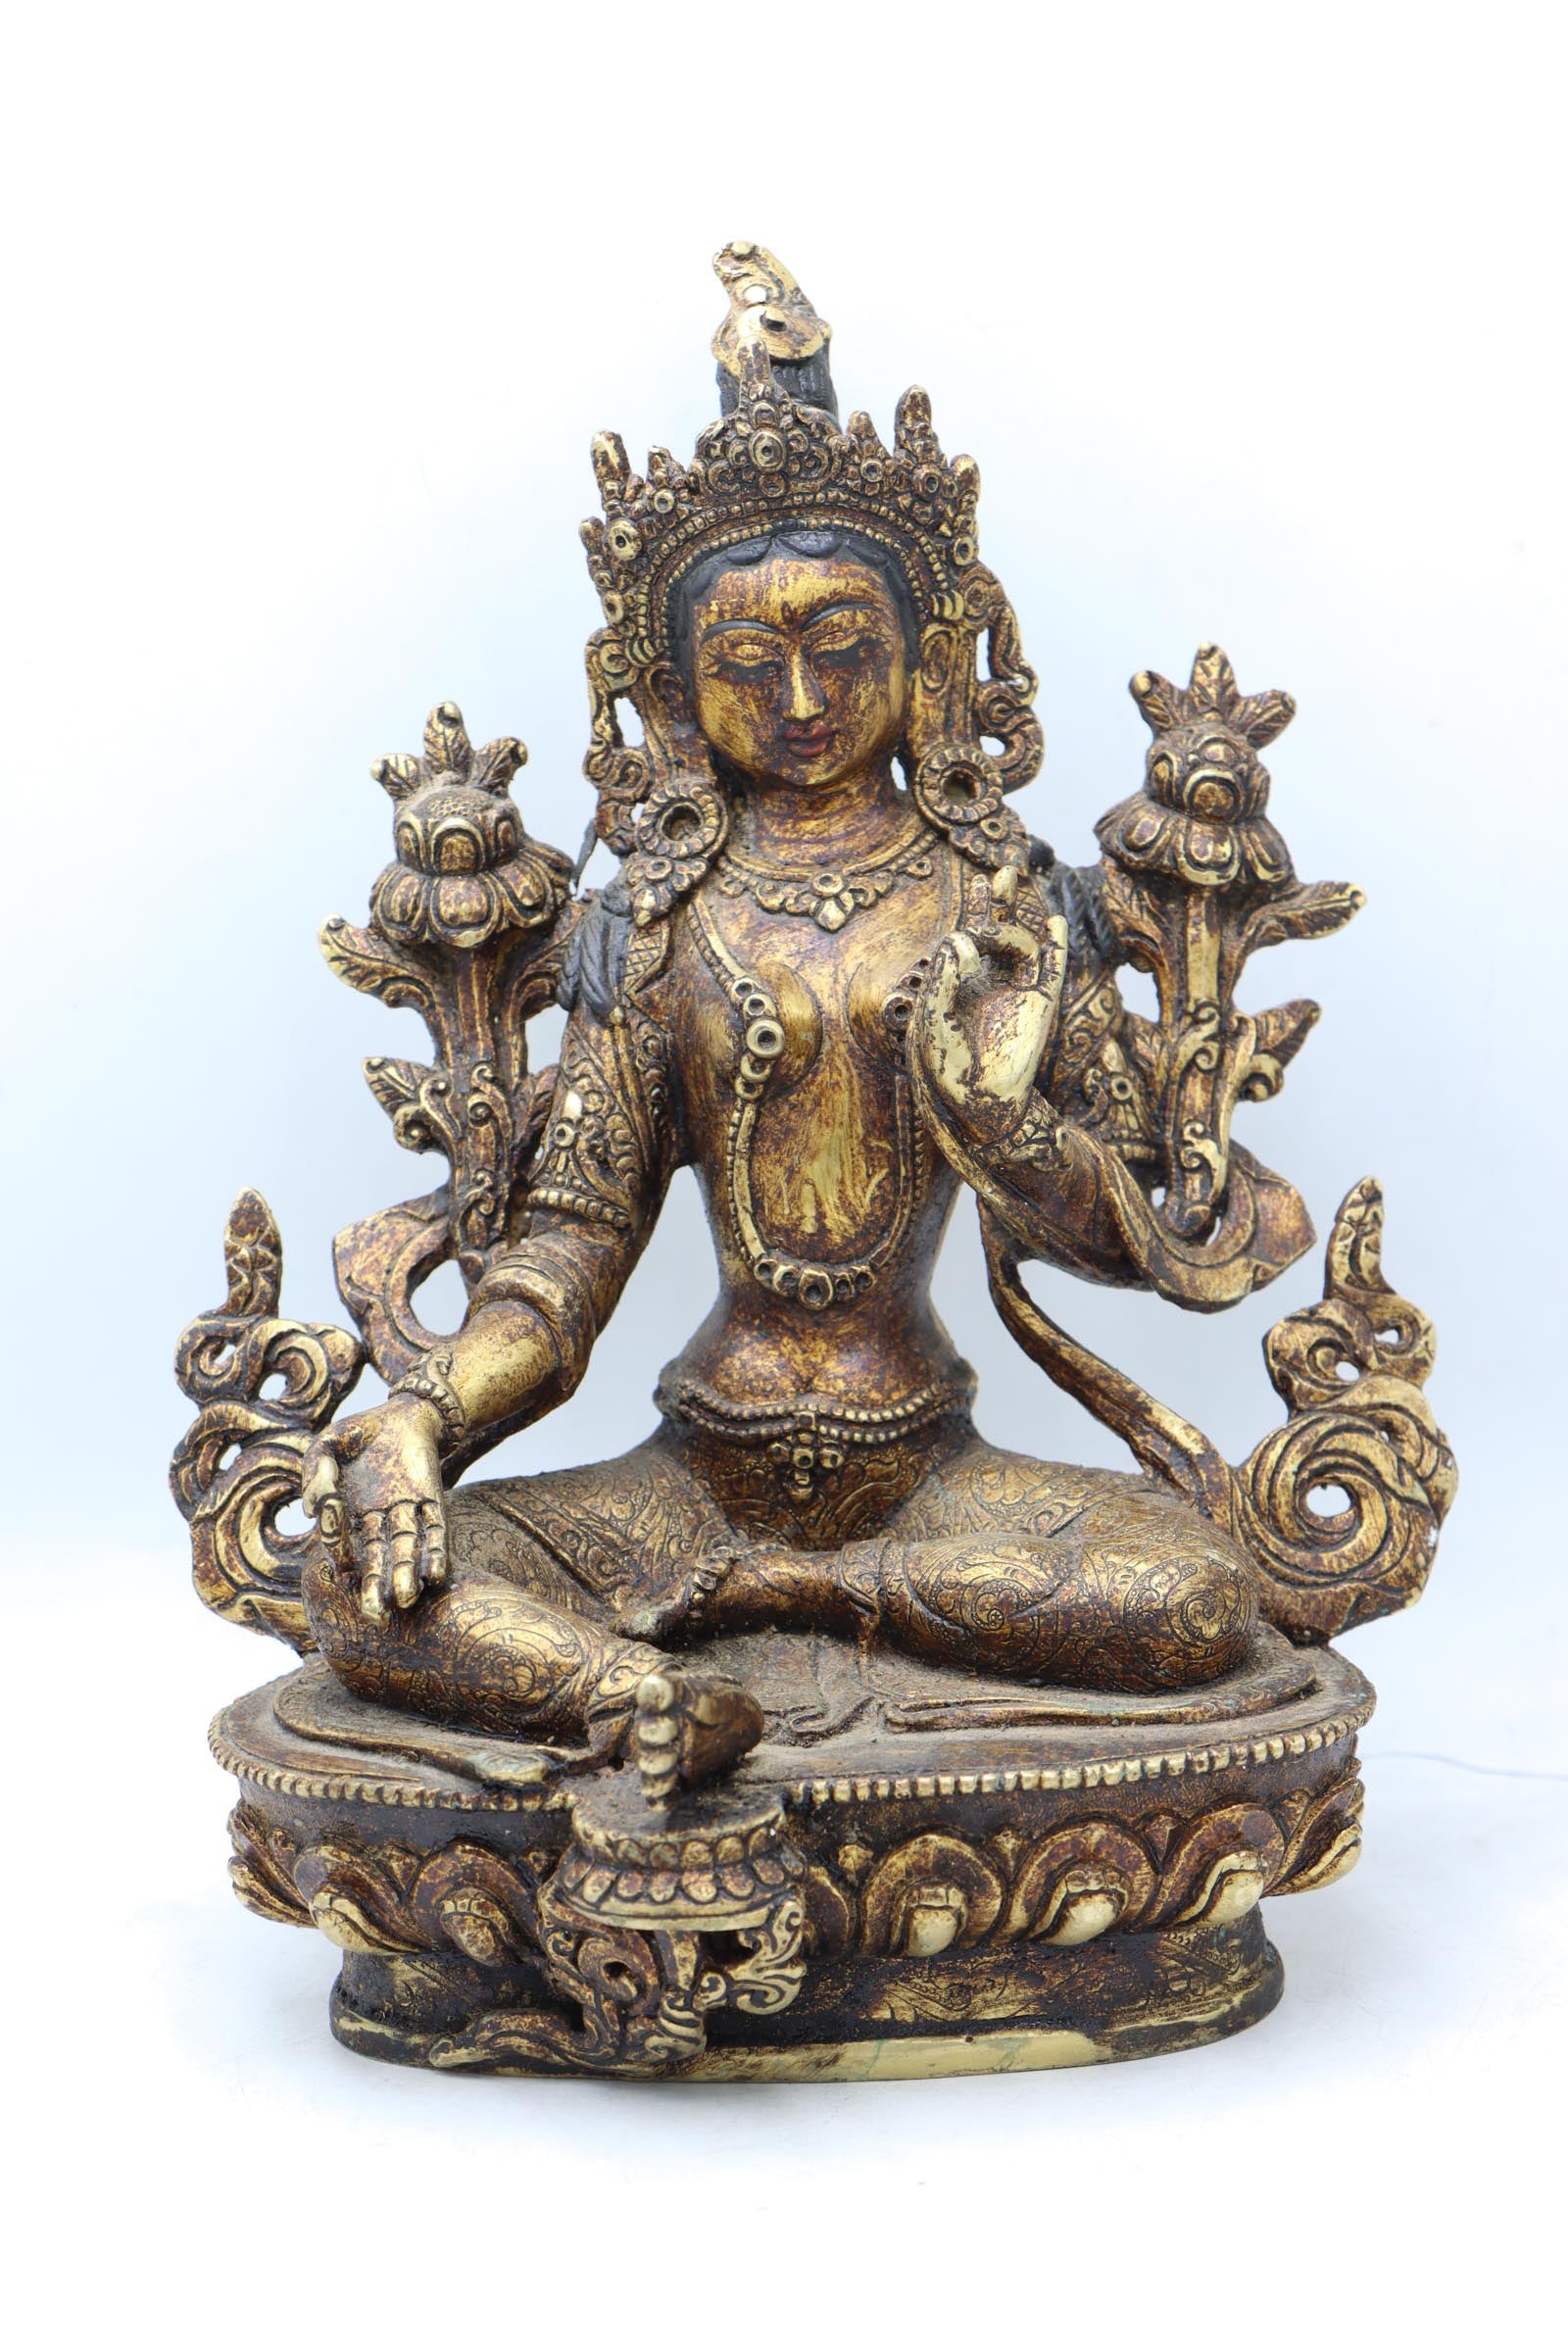  Green Tara Statue for healing, and freedom from unease and obstructions.